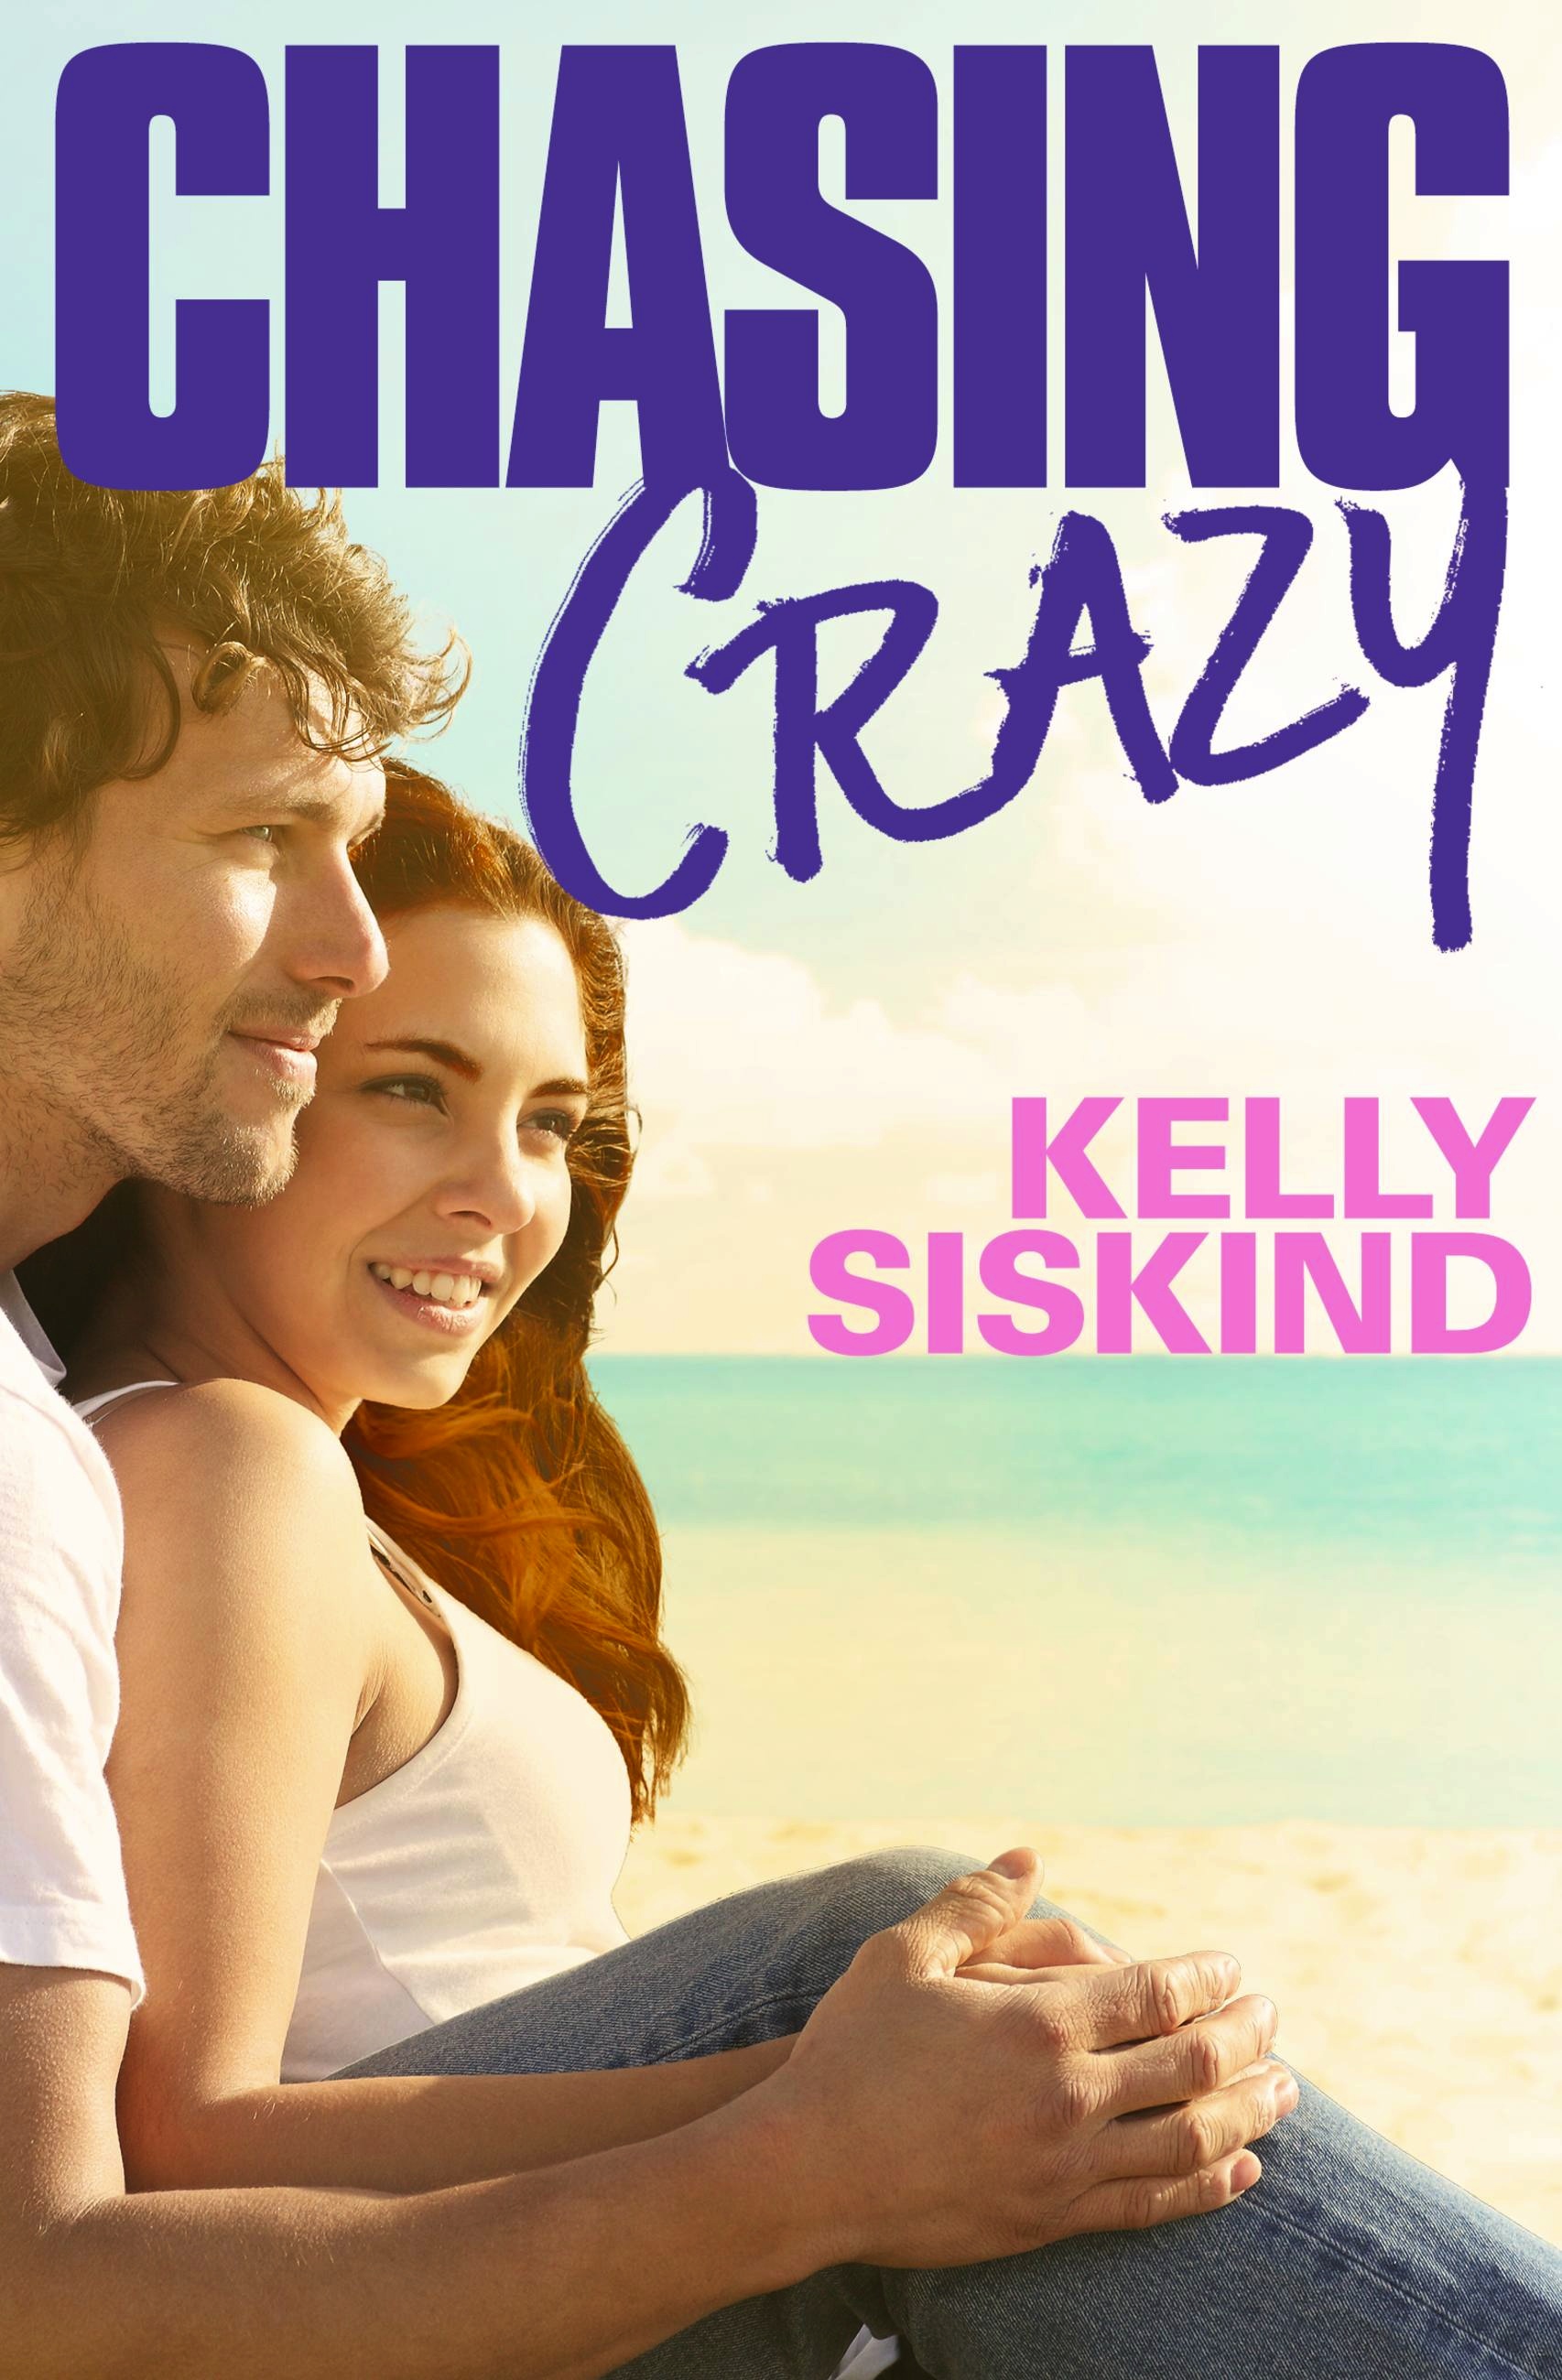 Chasing Crazy by Kelly Siskind | Hachette Book Group